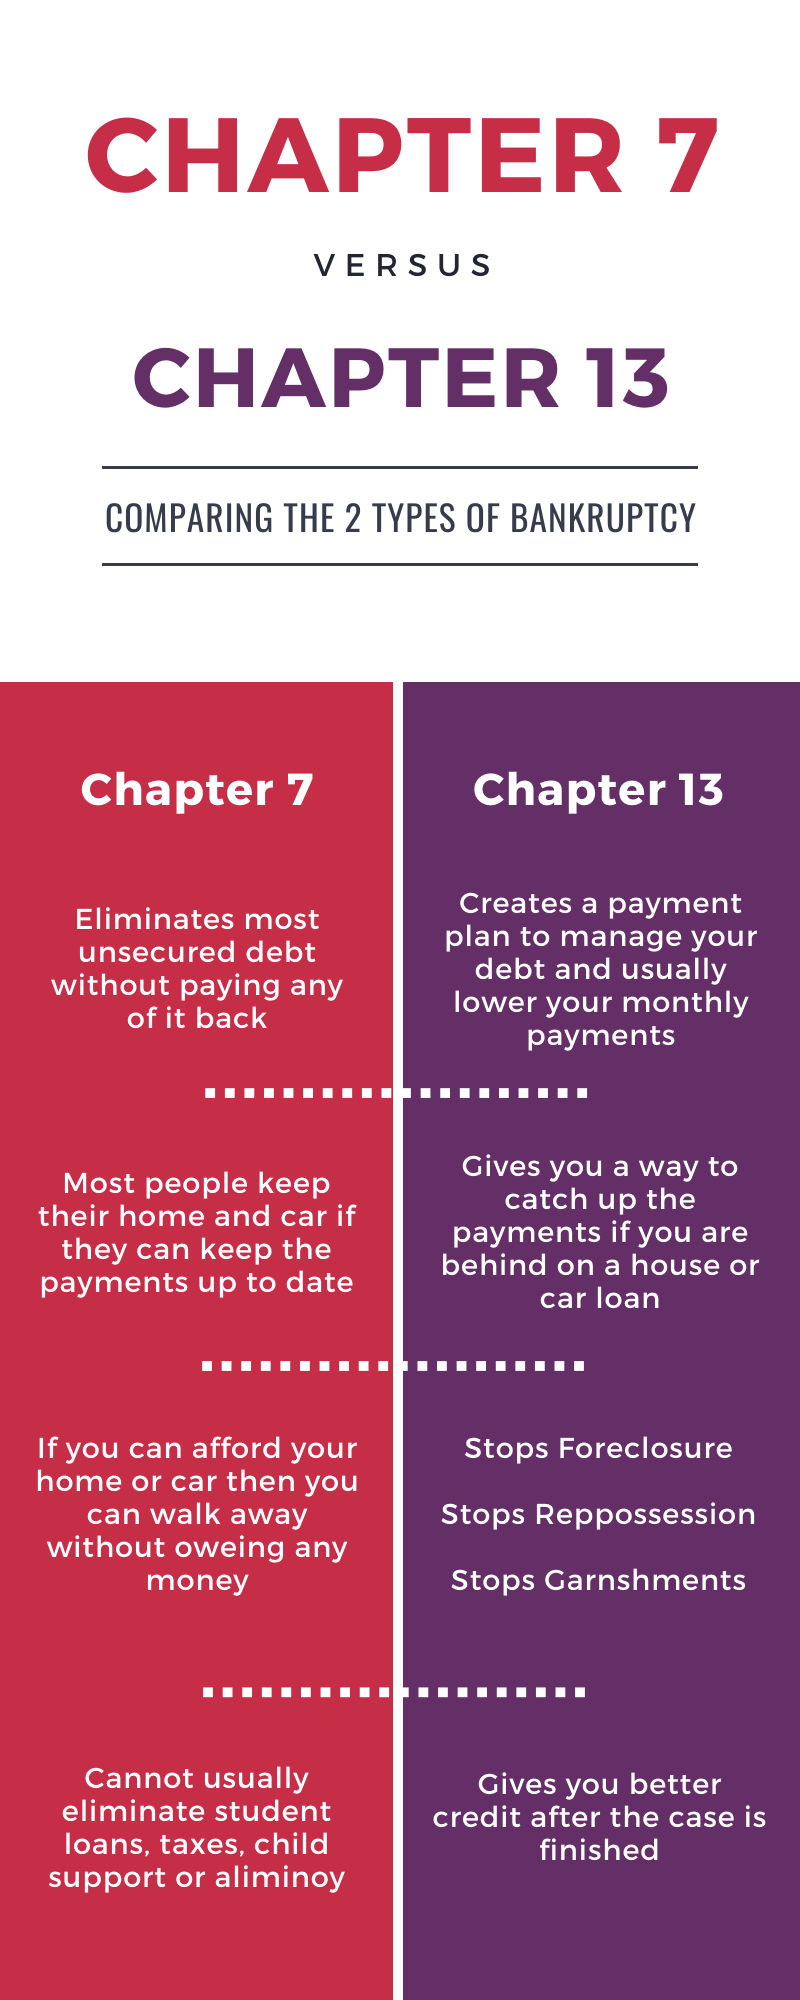 Comparing Chapter 7 versus Chapter 13 Bankruptcy